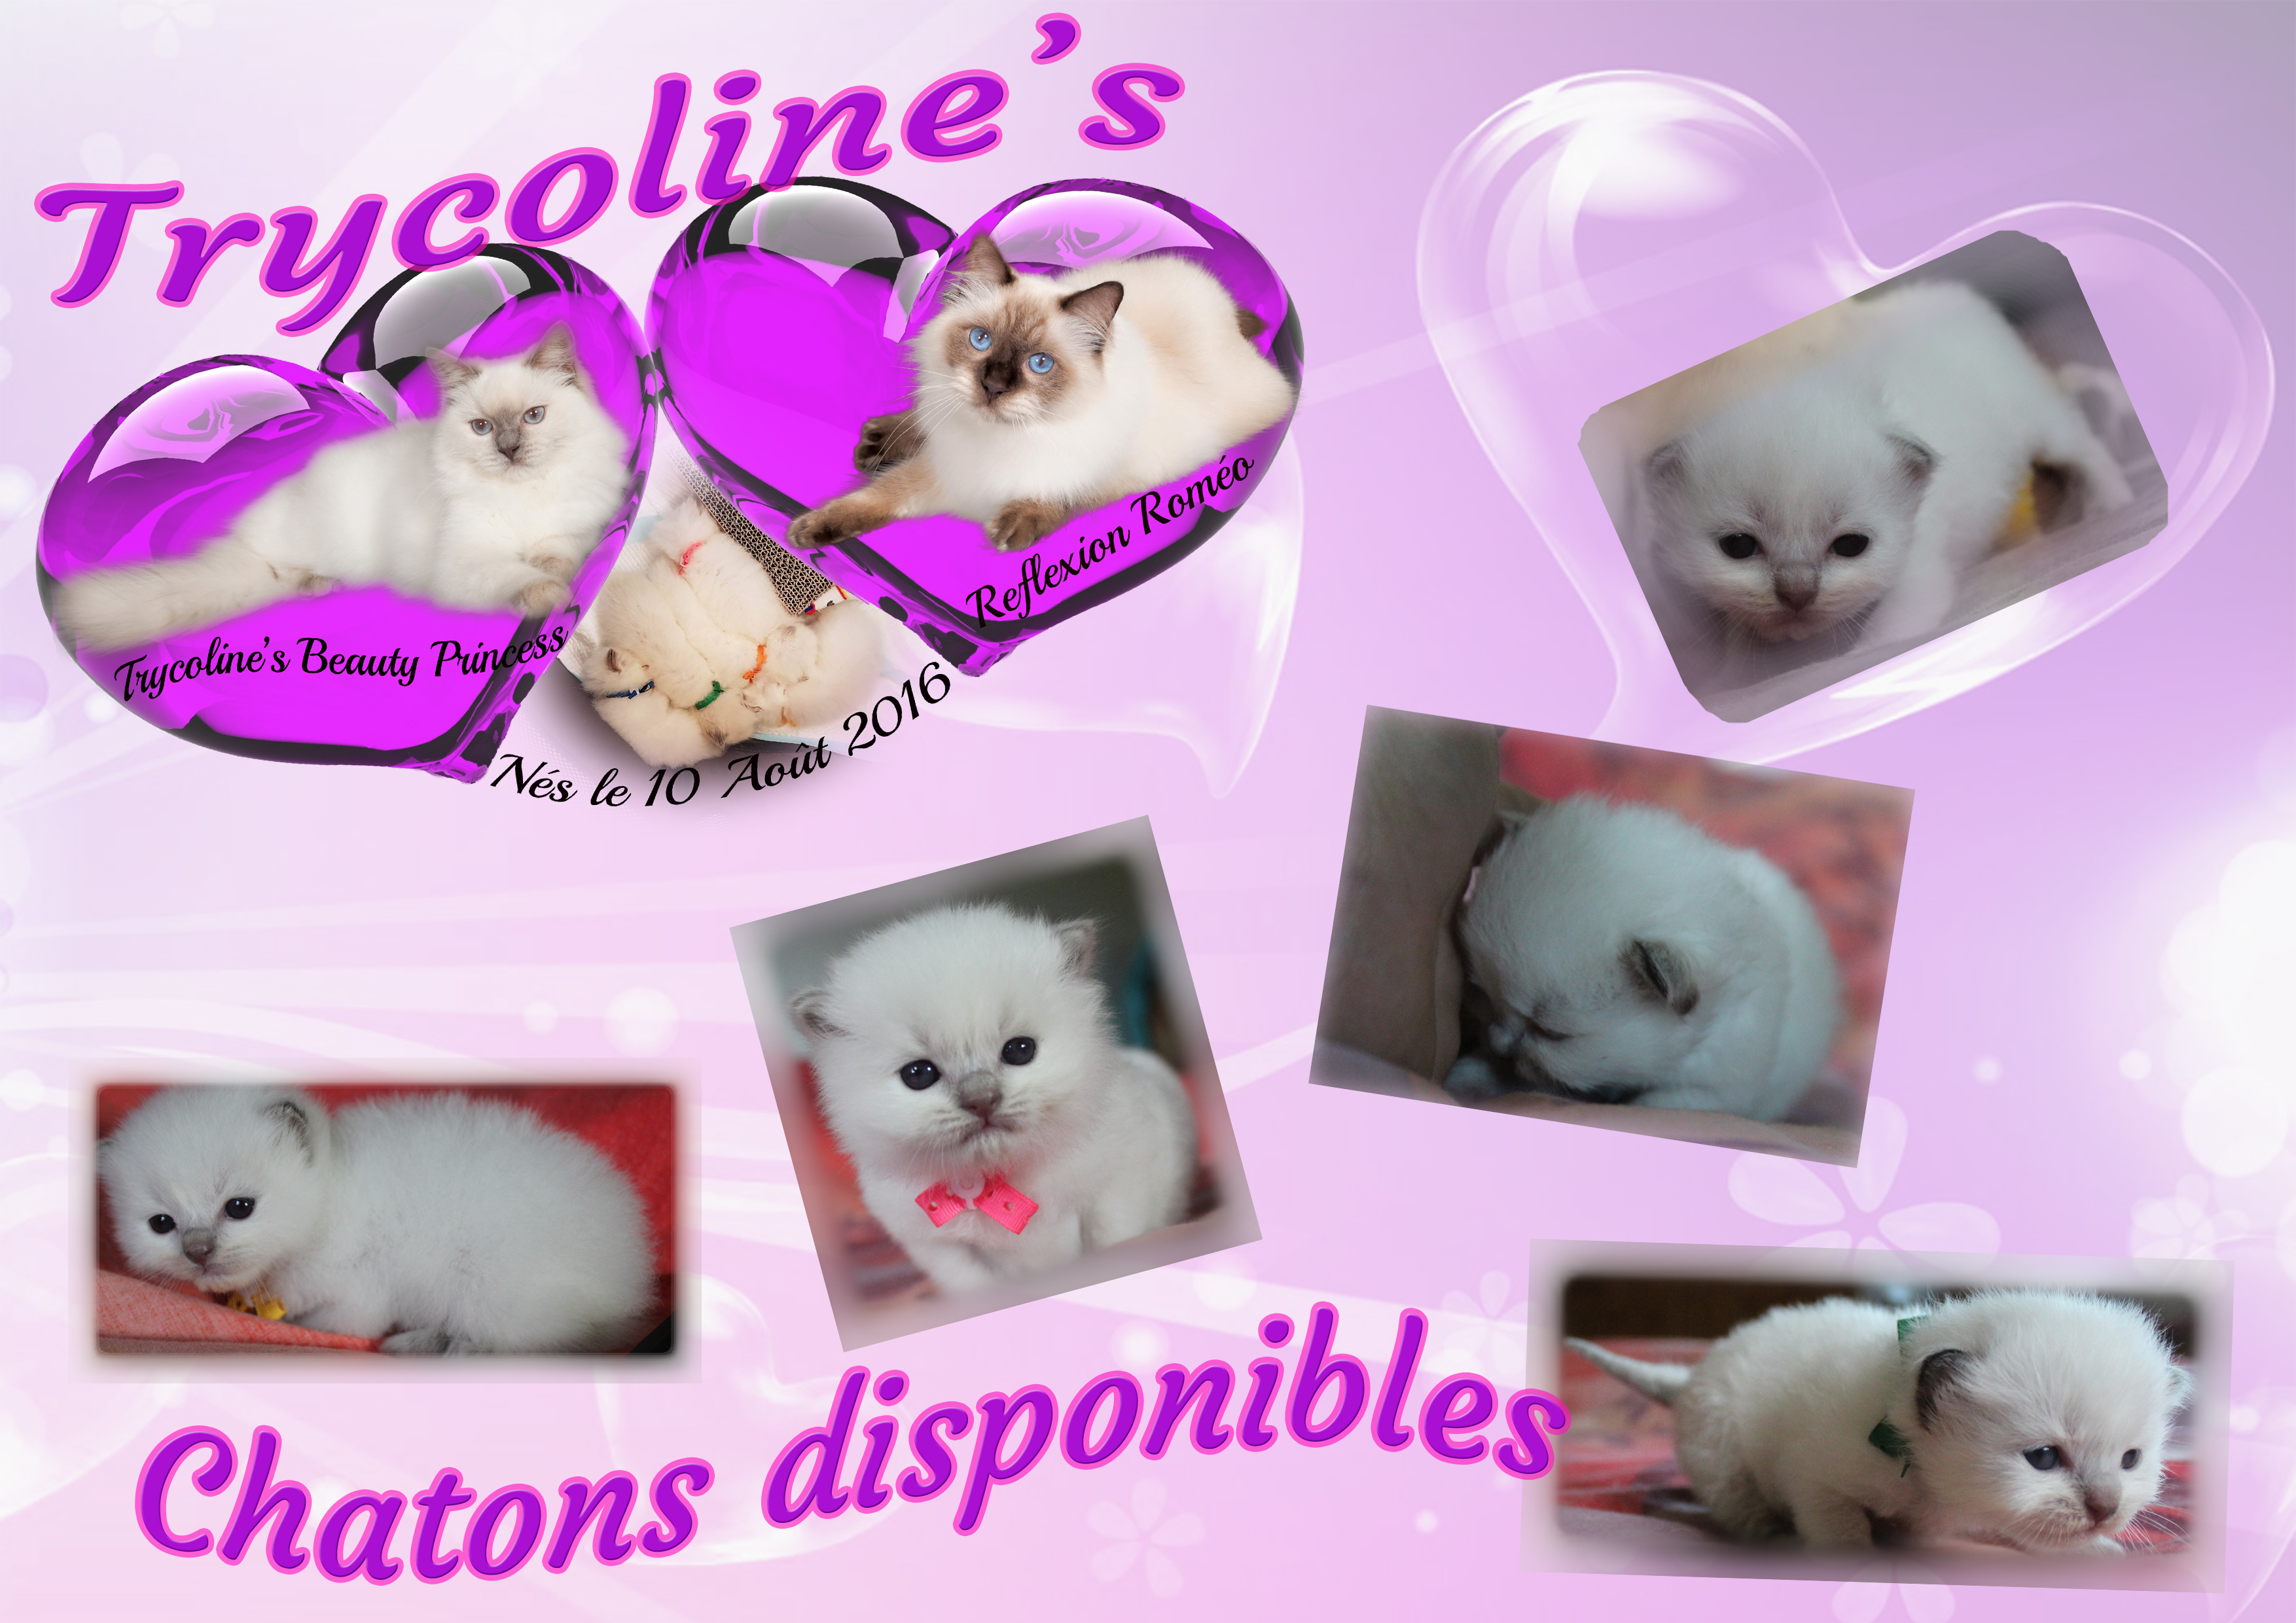 Photo cadre d'exposition Royal Canin Chatons disponibles 